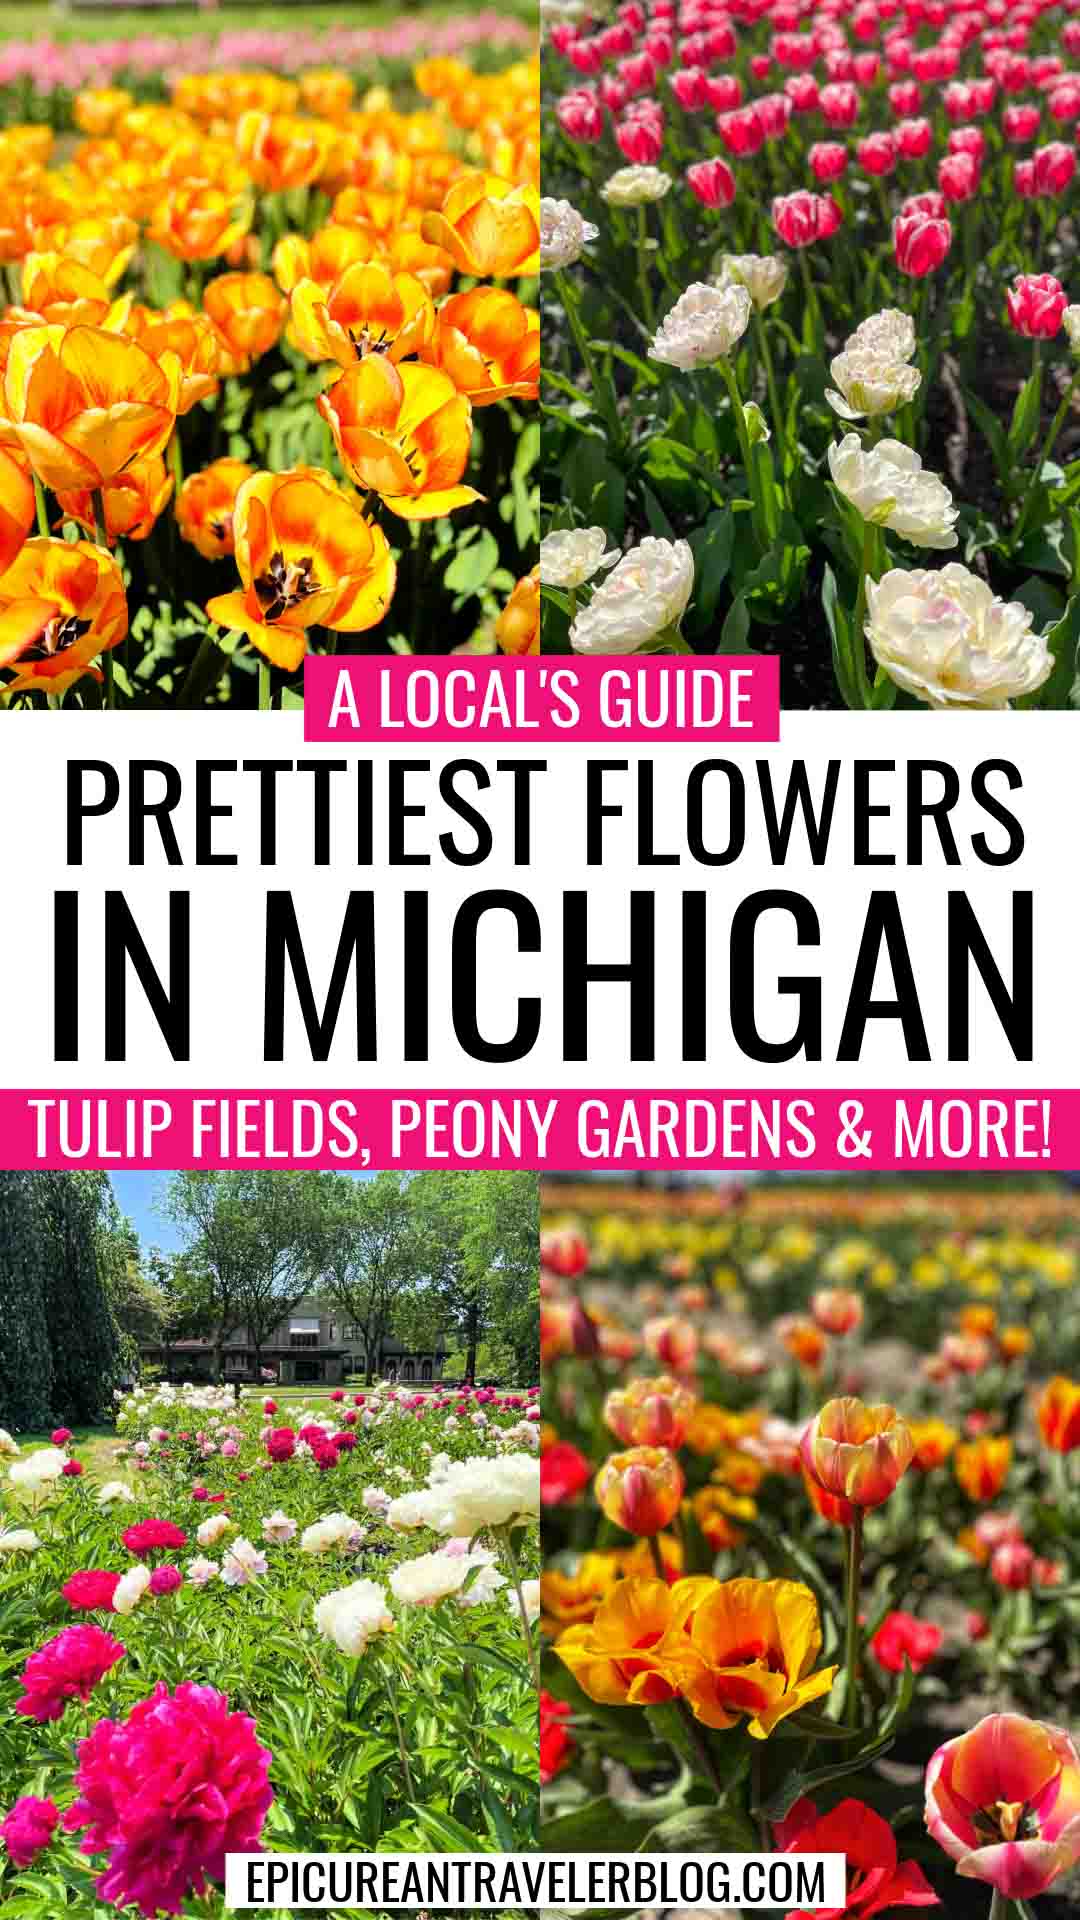 Prettiest flowers in Michigan images of tulip fields and peony garden